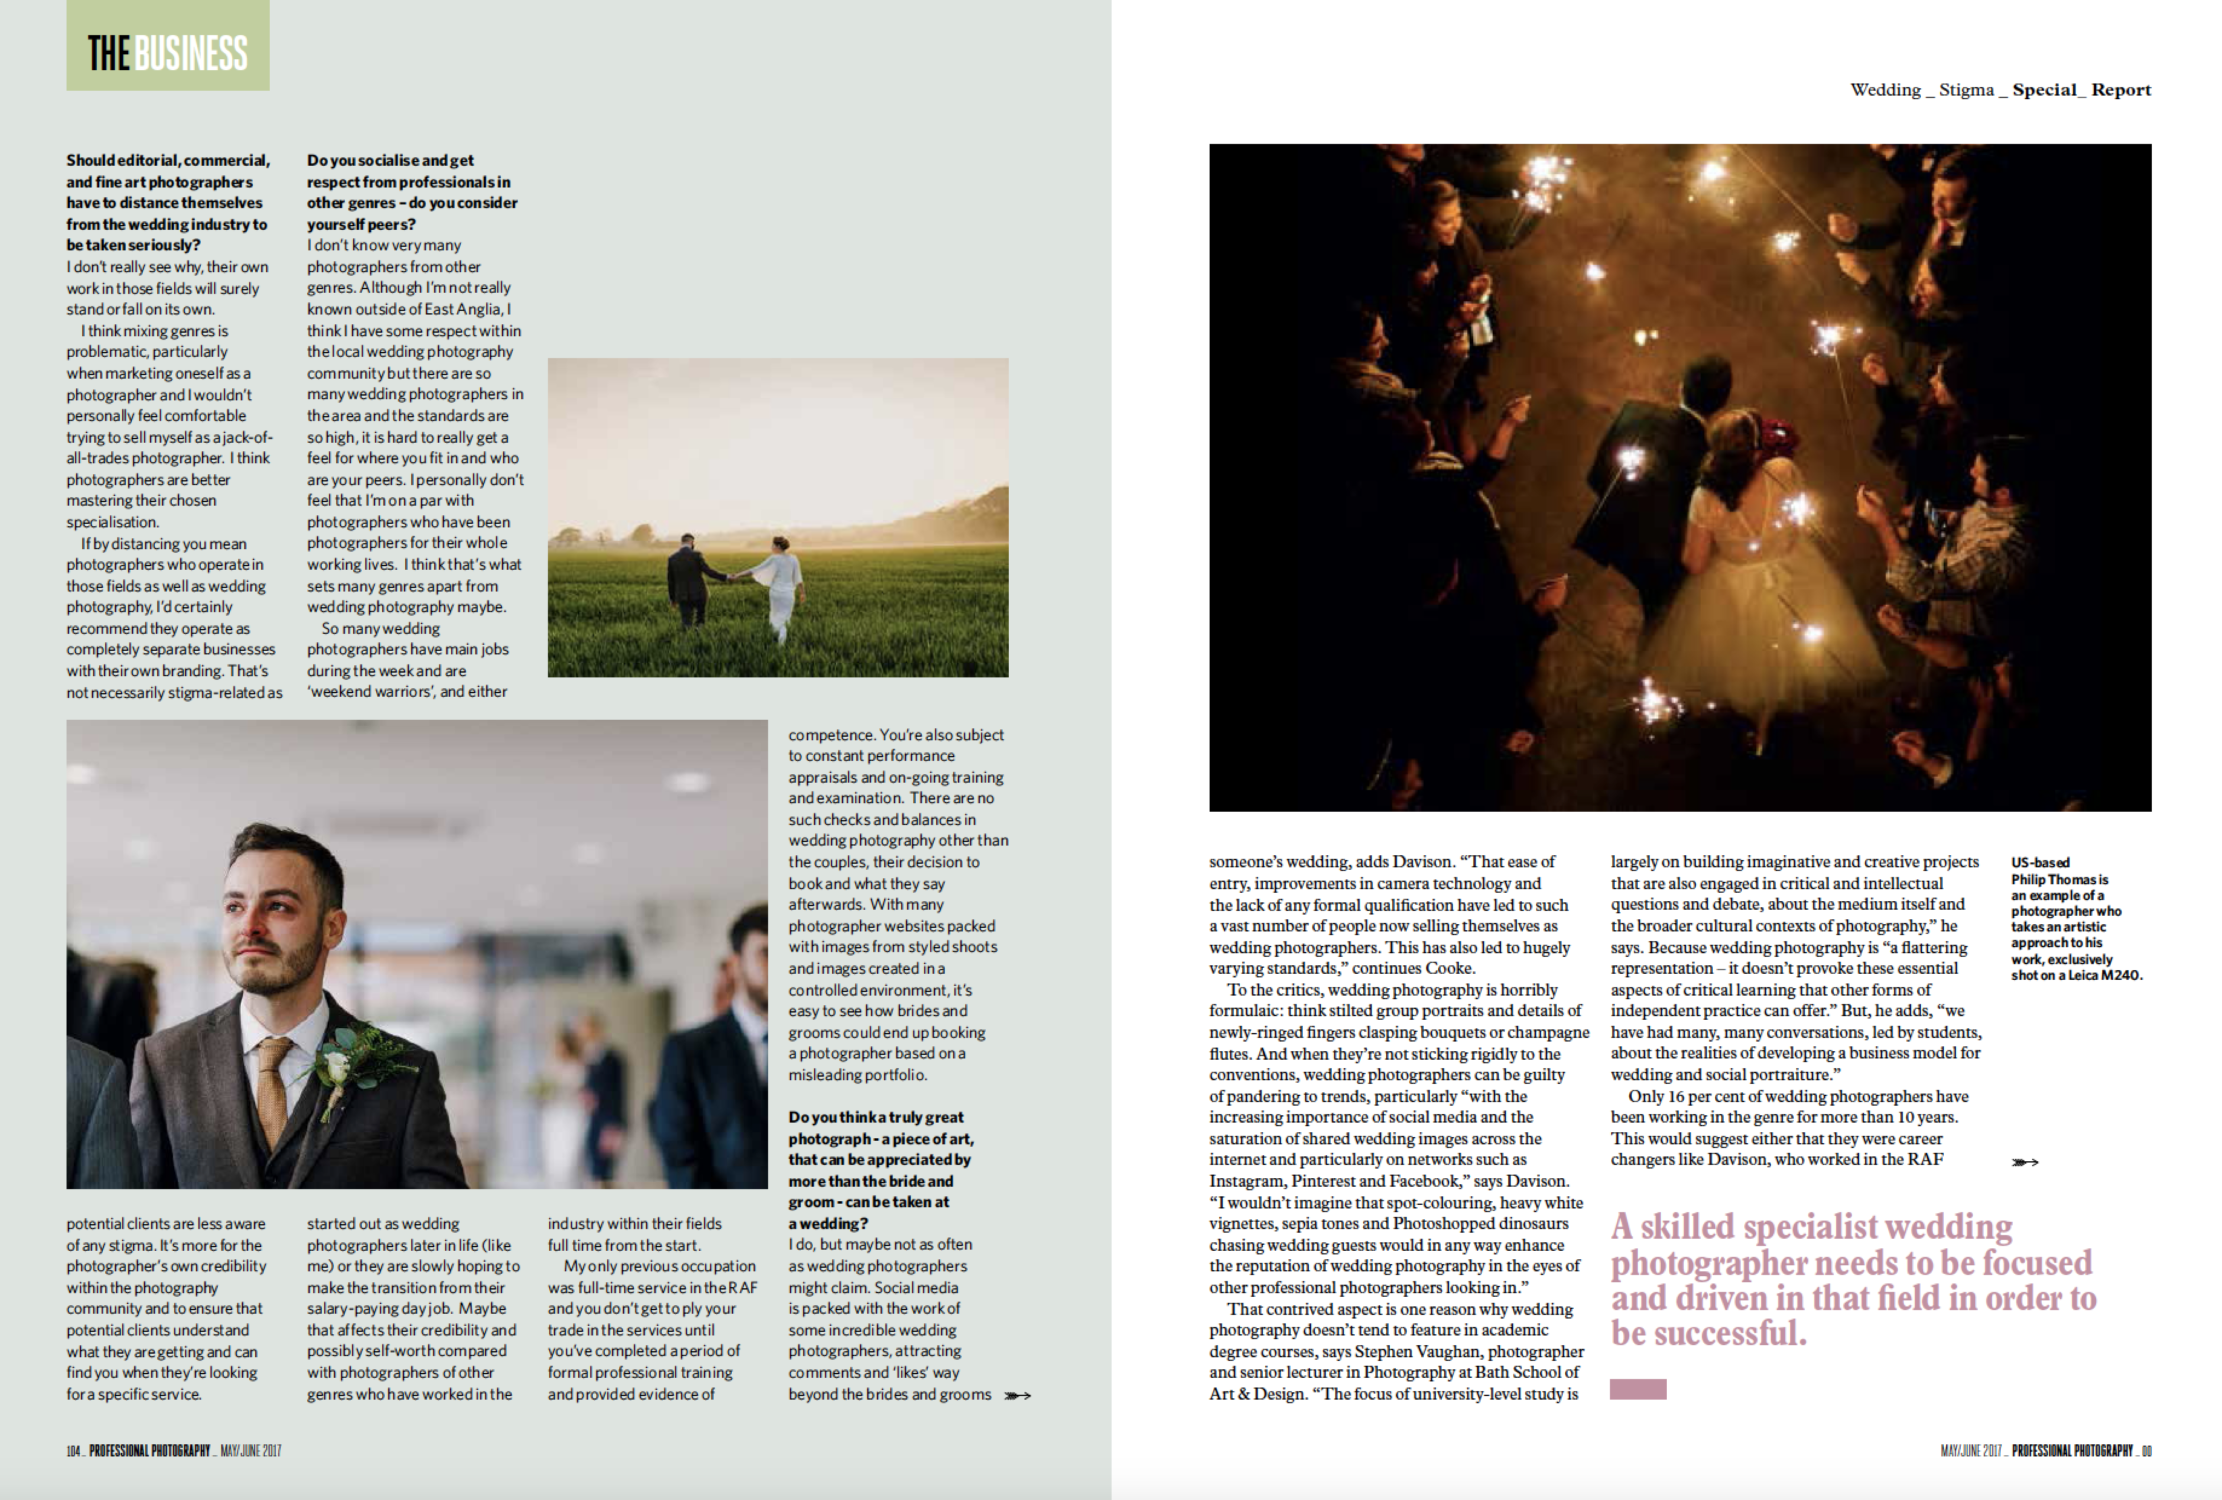 Do wedding photographers deserve our respect? Page 2 of 4 courtesy of Professional Photography Magazine